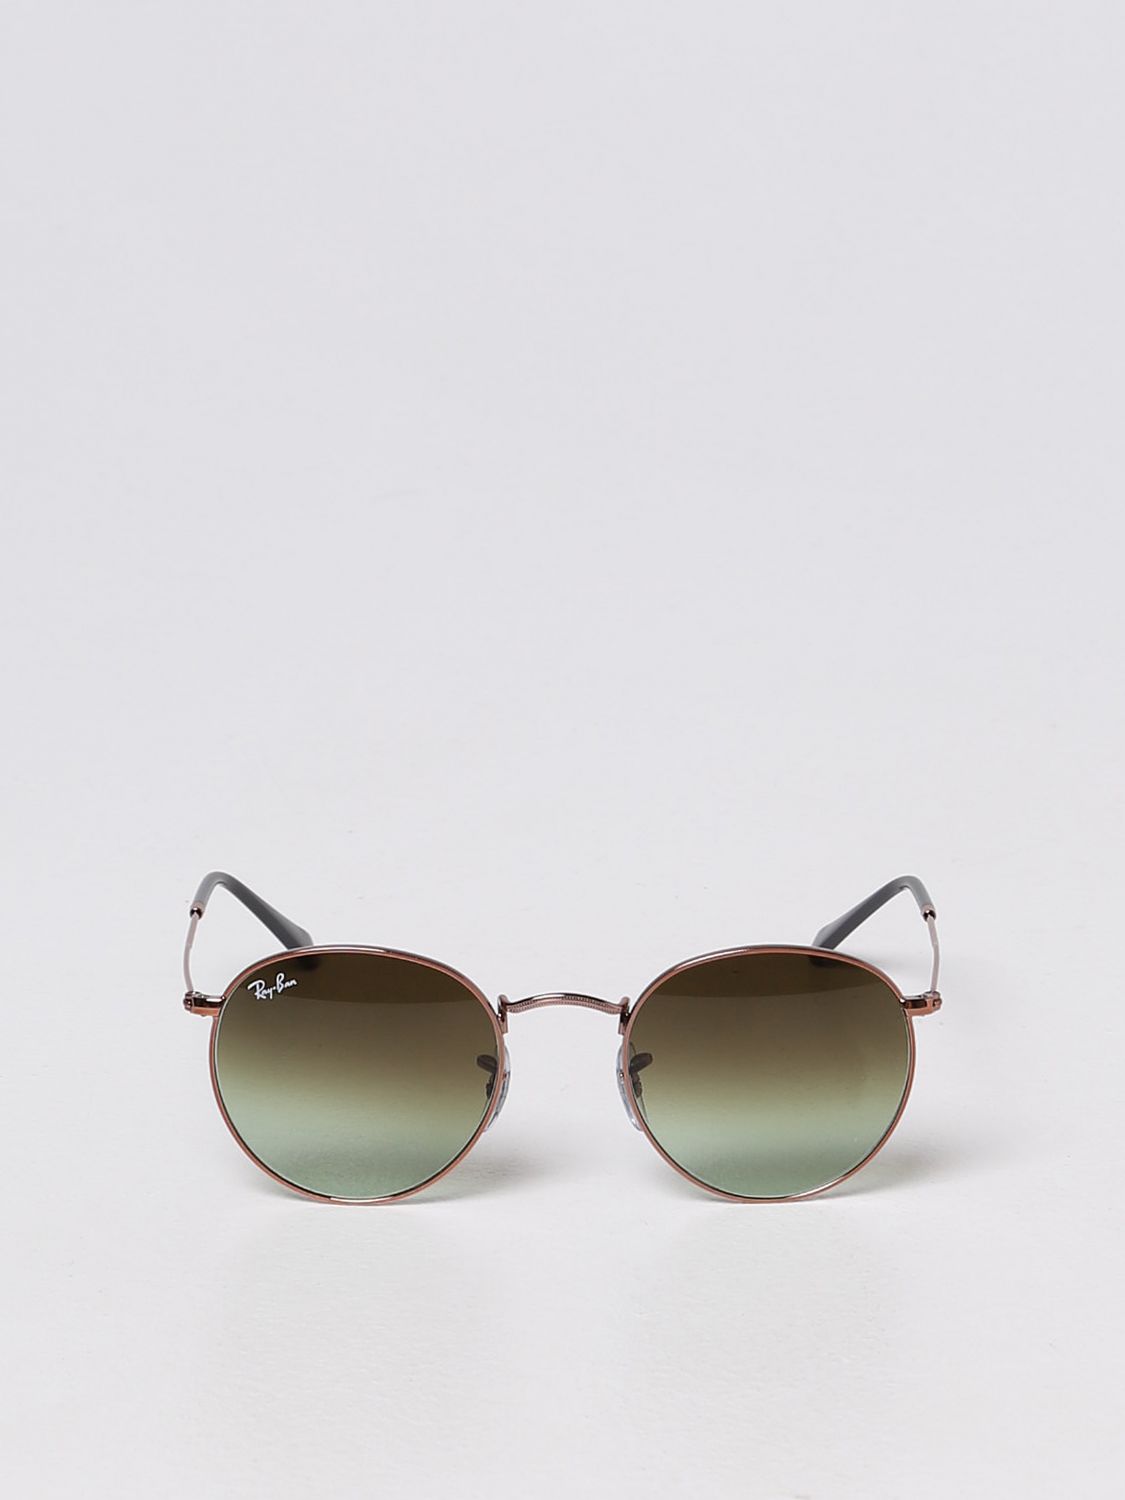 Lunettes Ray-Ban: Lunettes femme Ray-ban olive 2